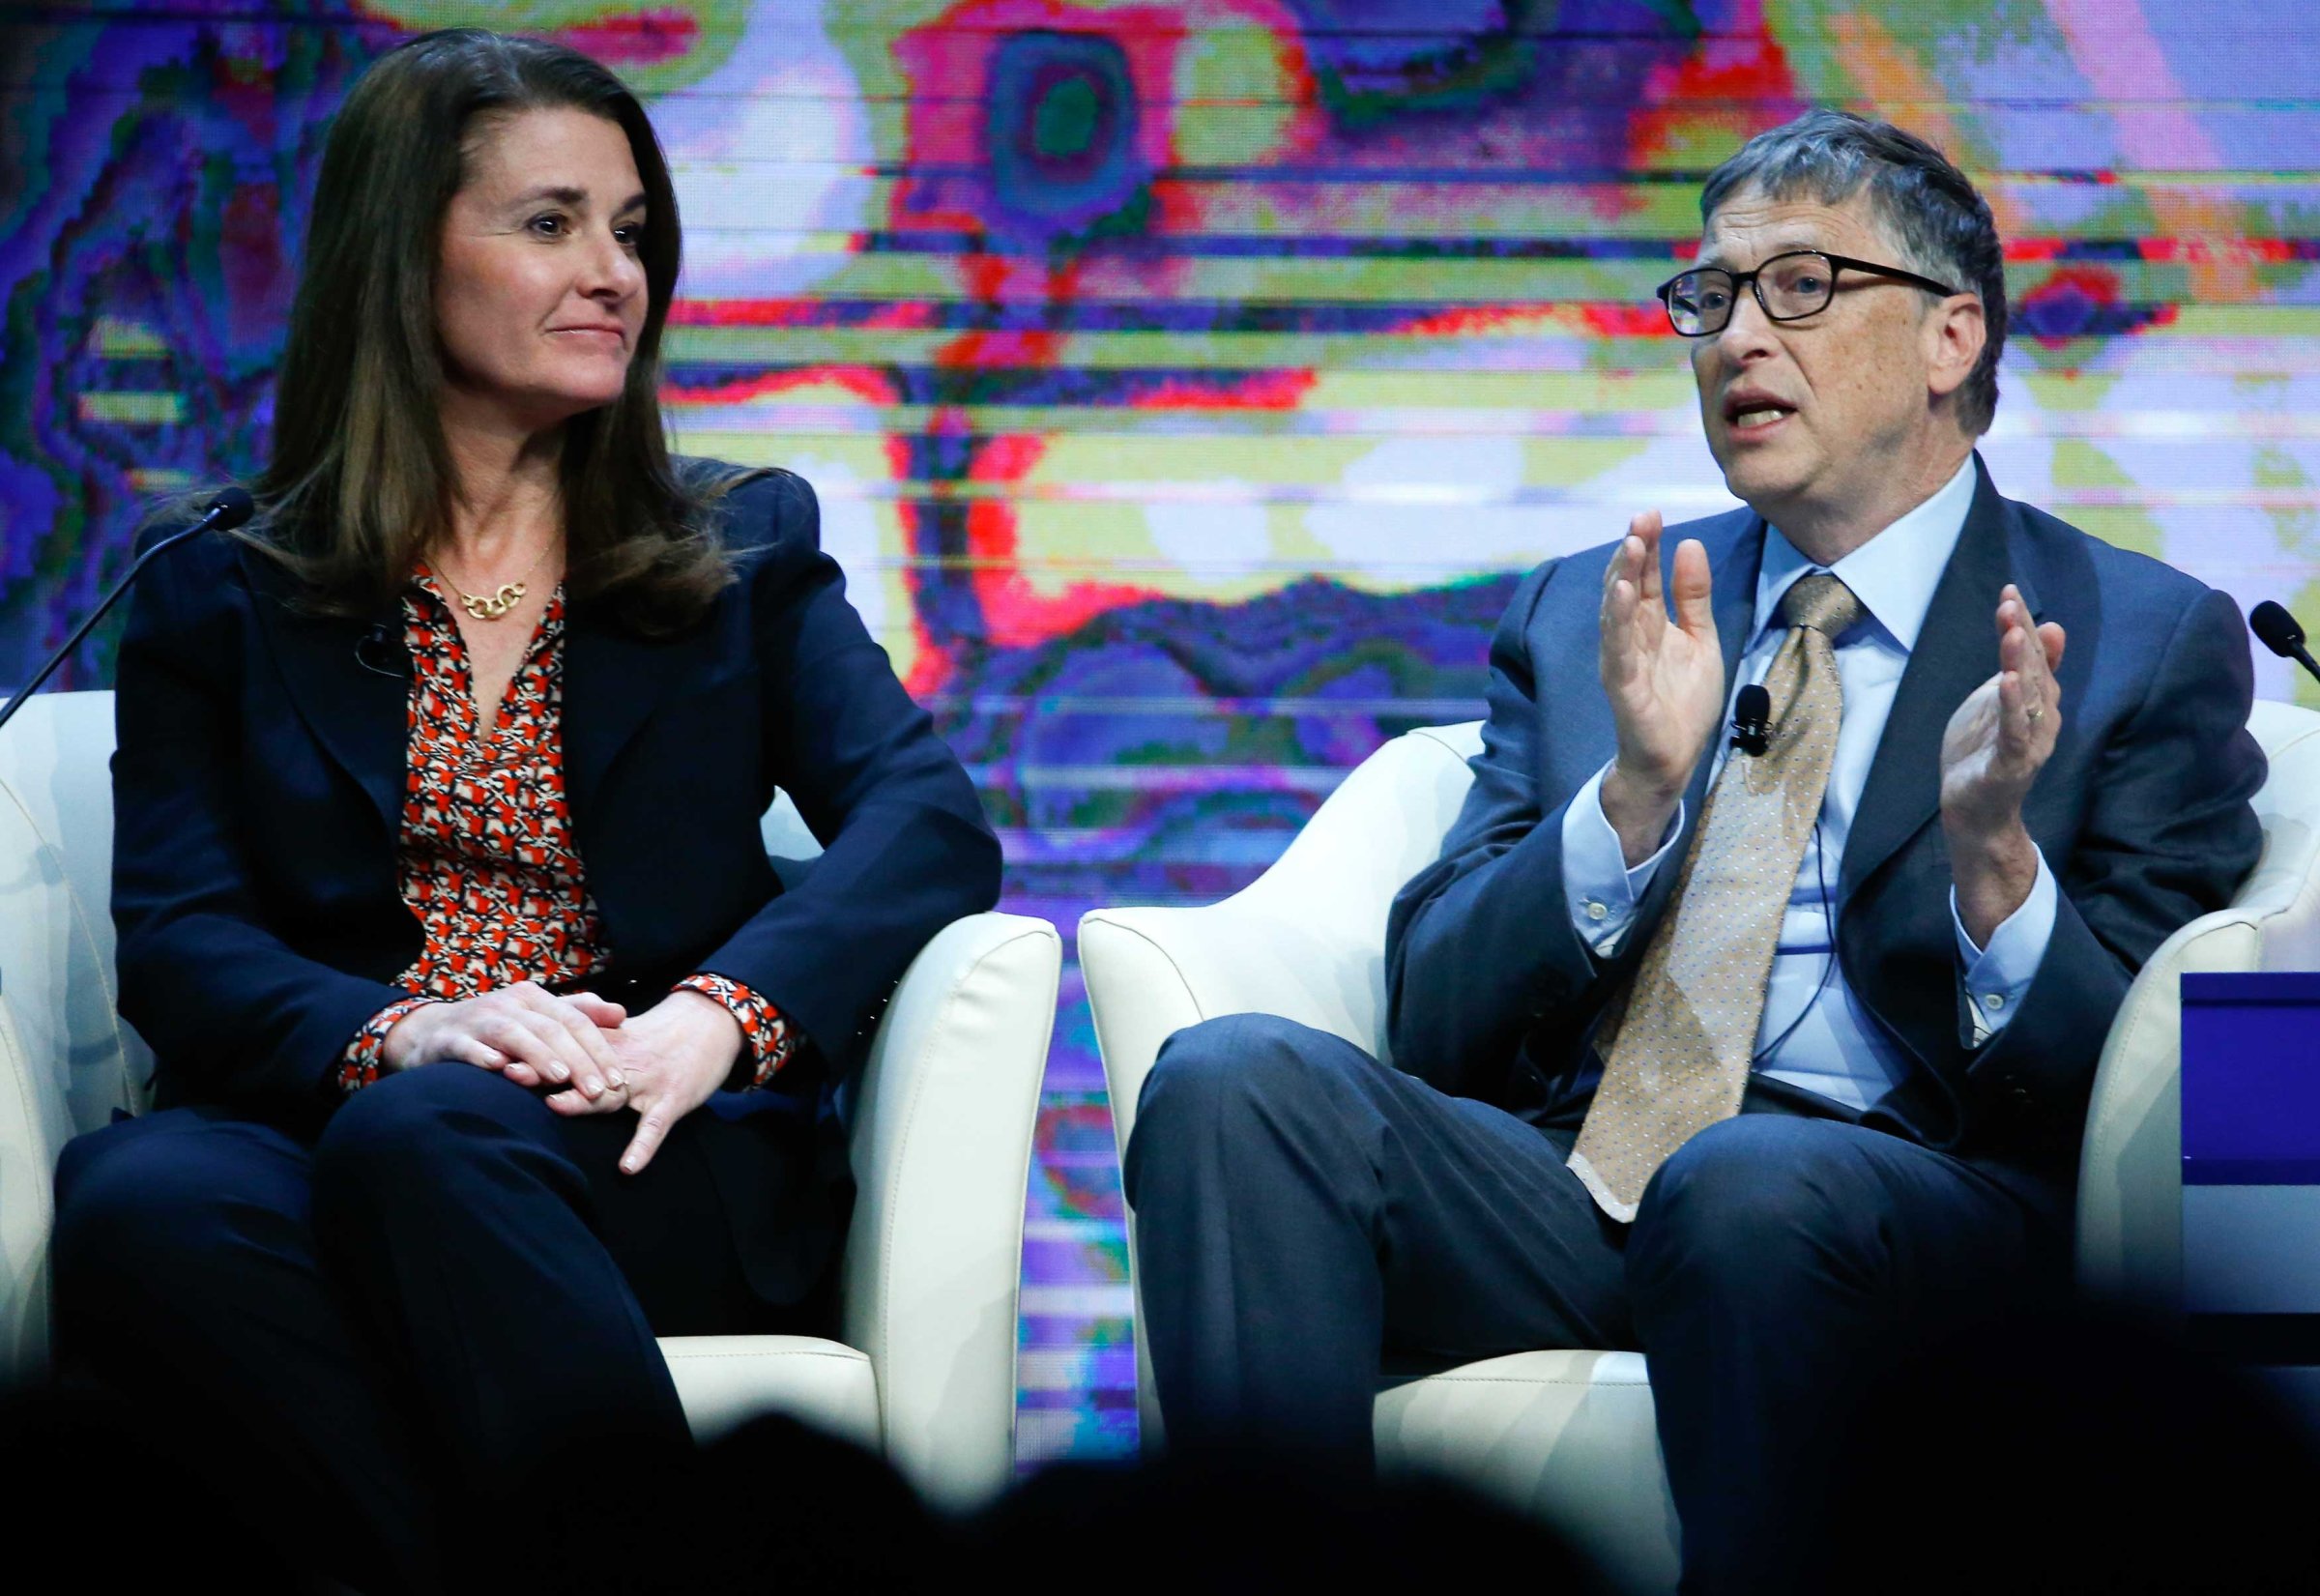 Bill Gates, Co-Chair of the Bill & Melinda Gates Foundation gestures next to his wife Melinda French Gates during the session 'Sustainable Development: A Vision for the Future' in the Swiss mountain resort of Davos